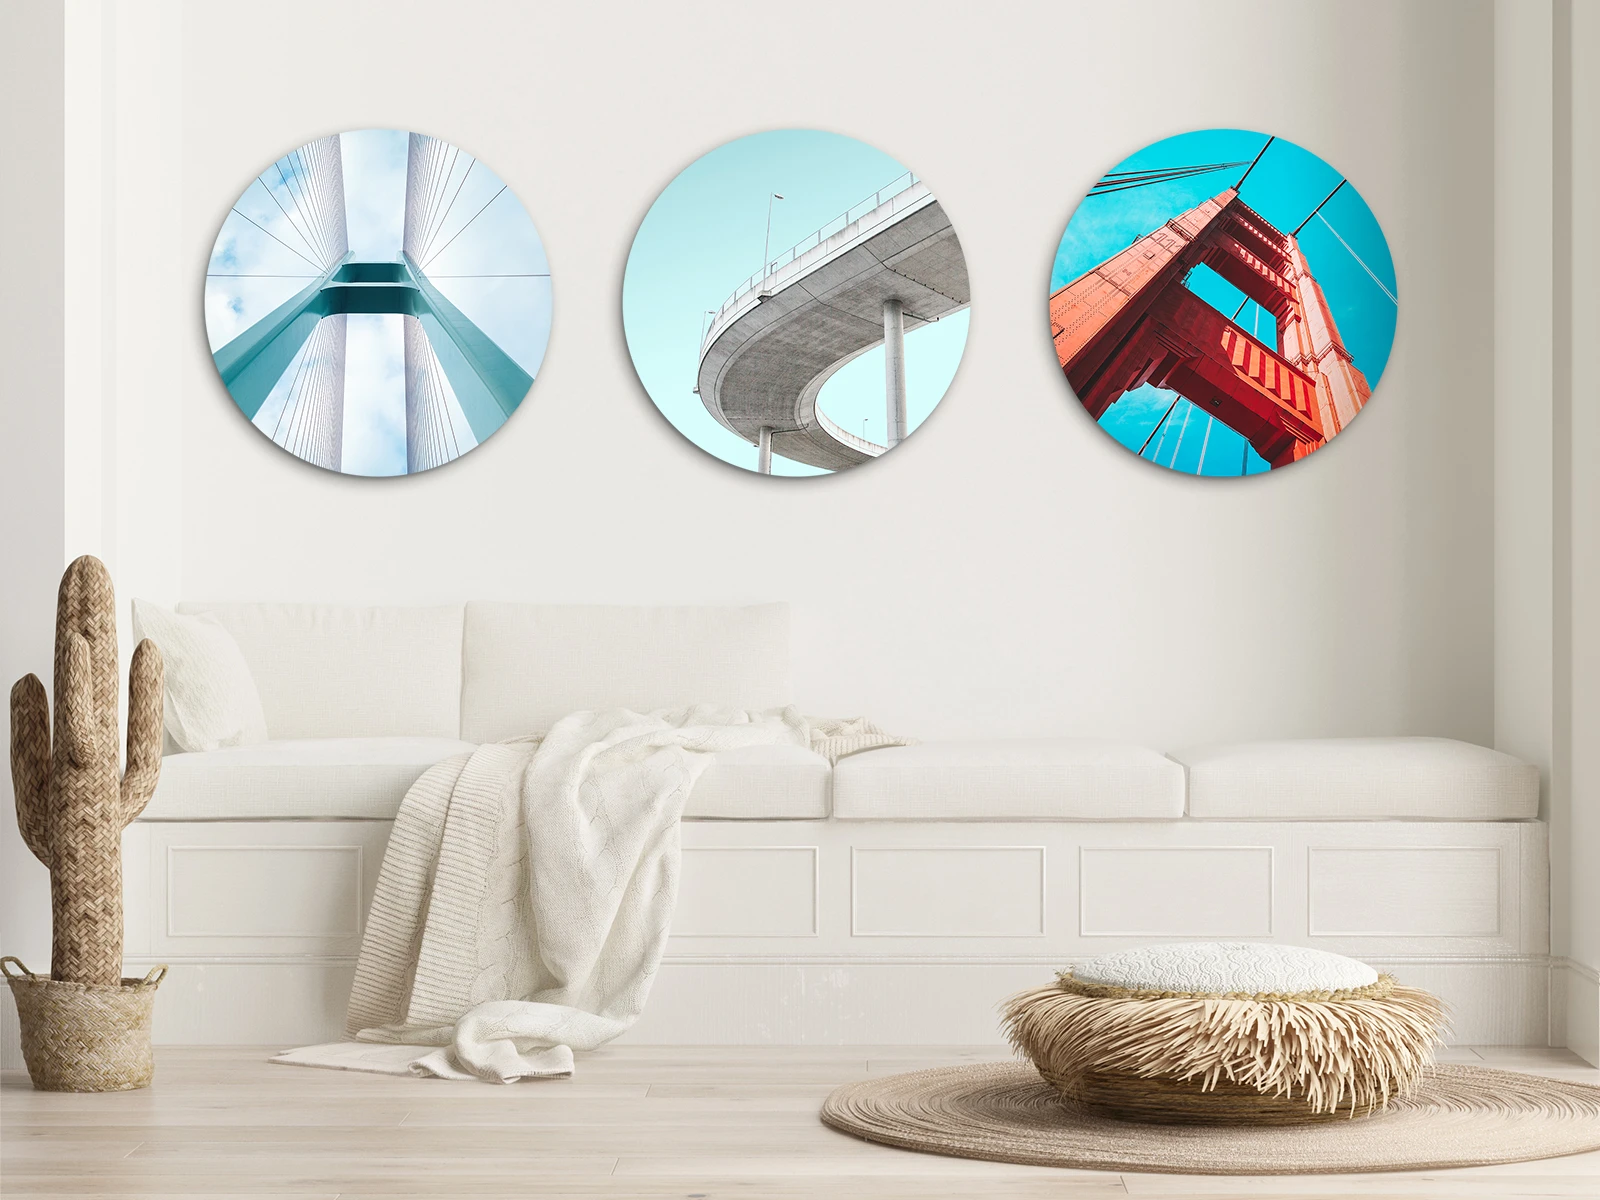 Different motifs on 3 round Fomat of an Original Photo Print Under Acrylic Glass. hanging on a wall in a living room.